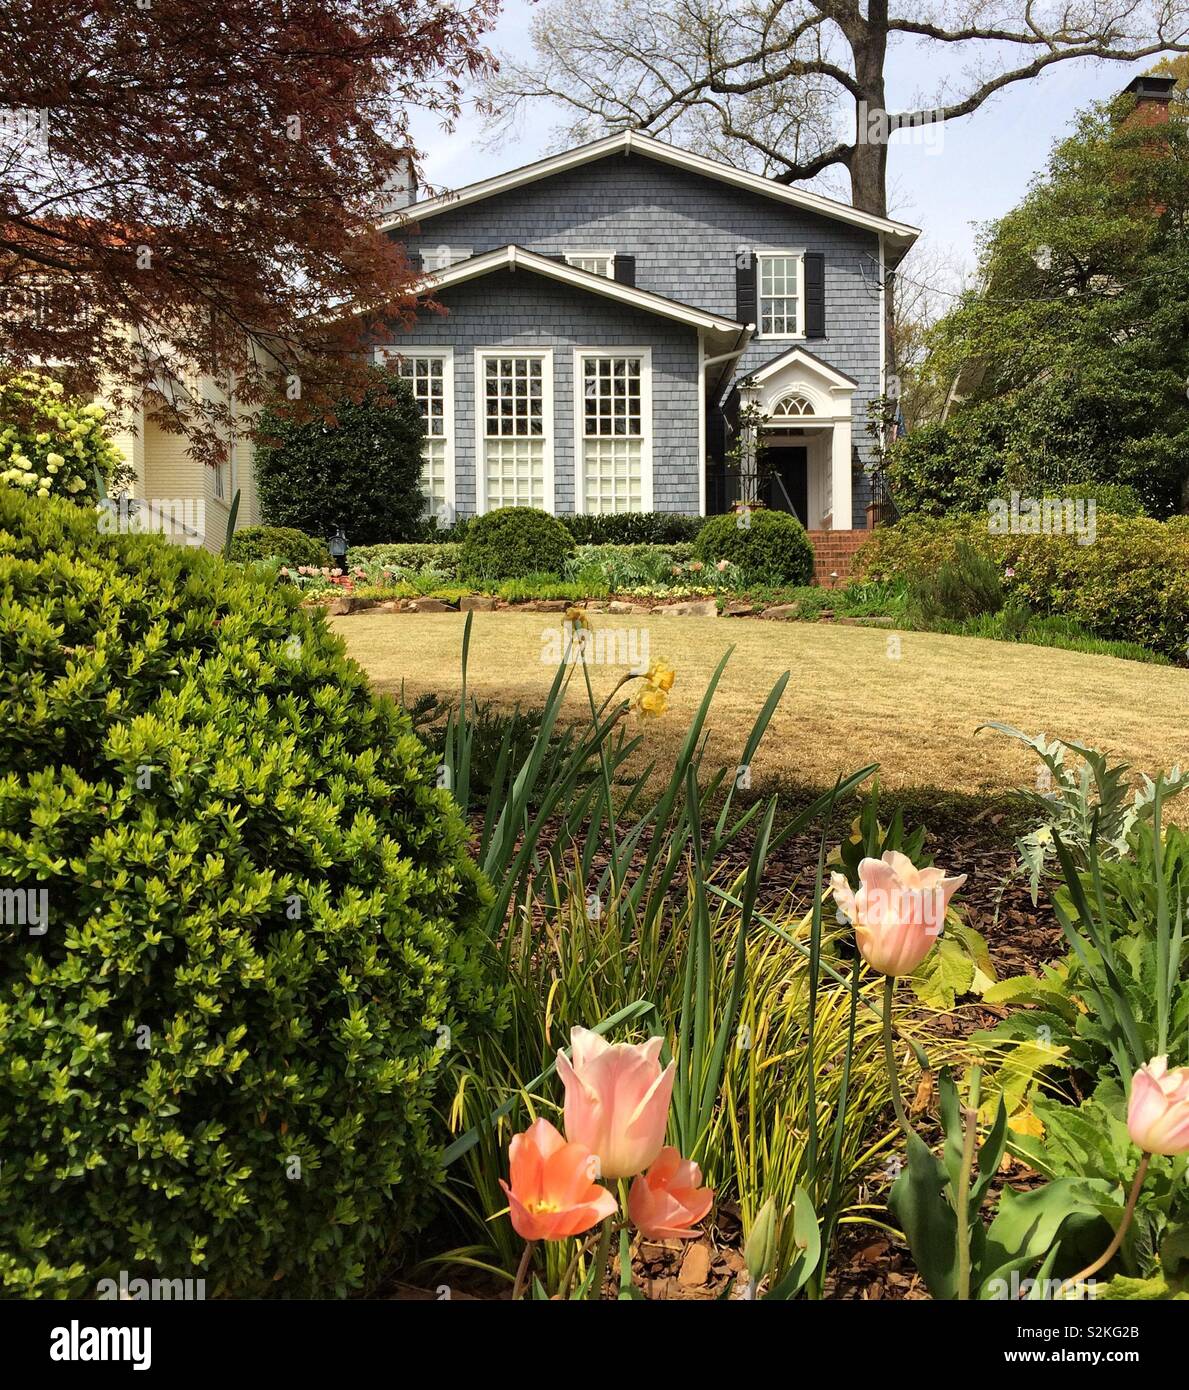 A spring view of a home in the Ansley Park Historic District, Atlanta, Georgia, United States Stock Photo